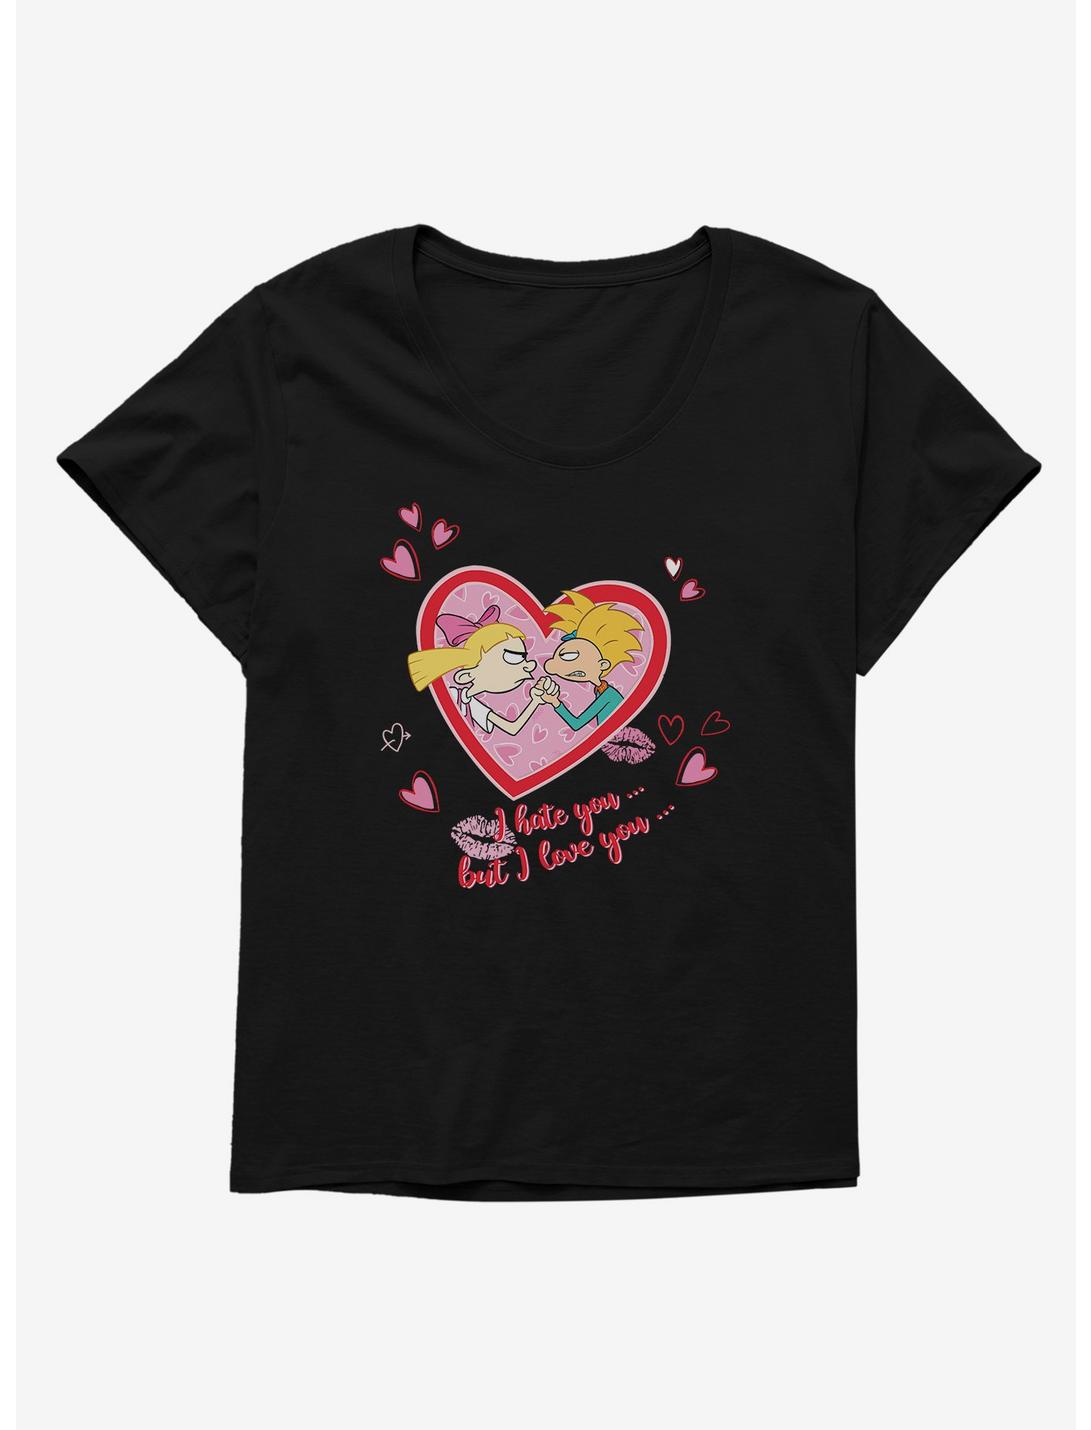 Hey Arnold! I Hate You? But I Love You? Girls T-Shirt Plus Size, , hi-res